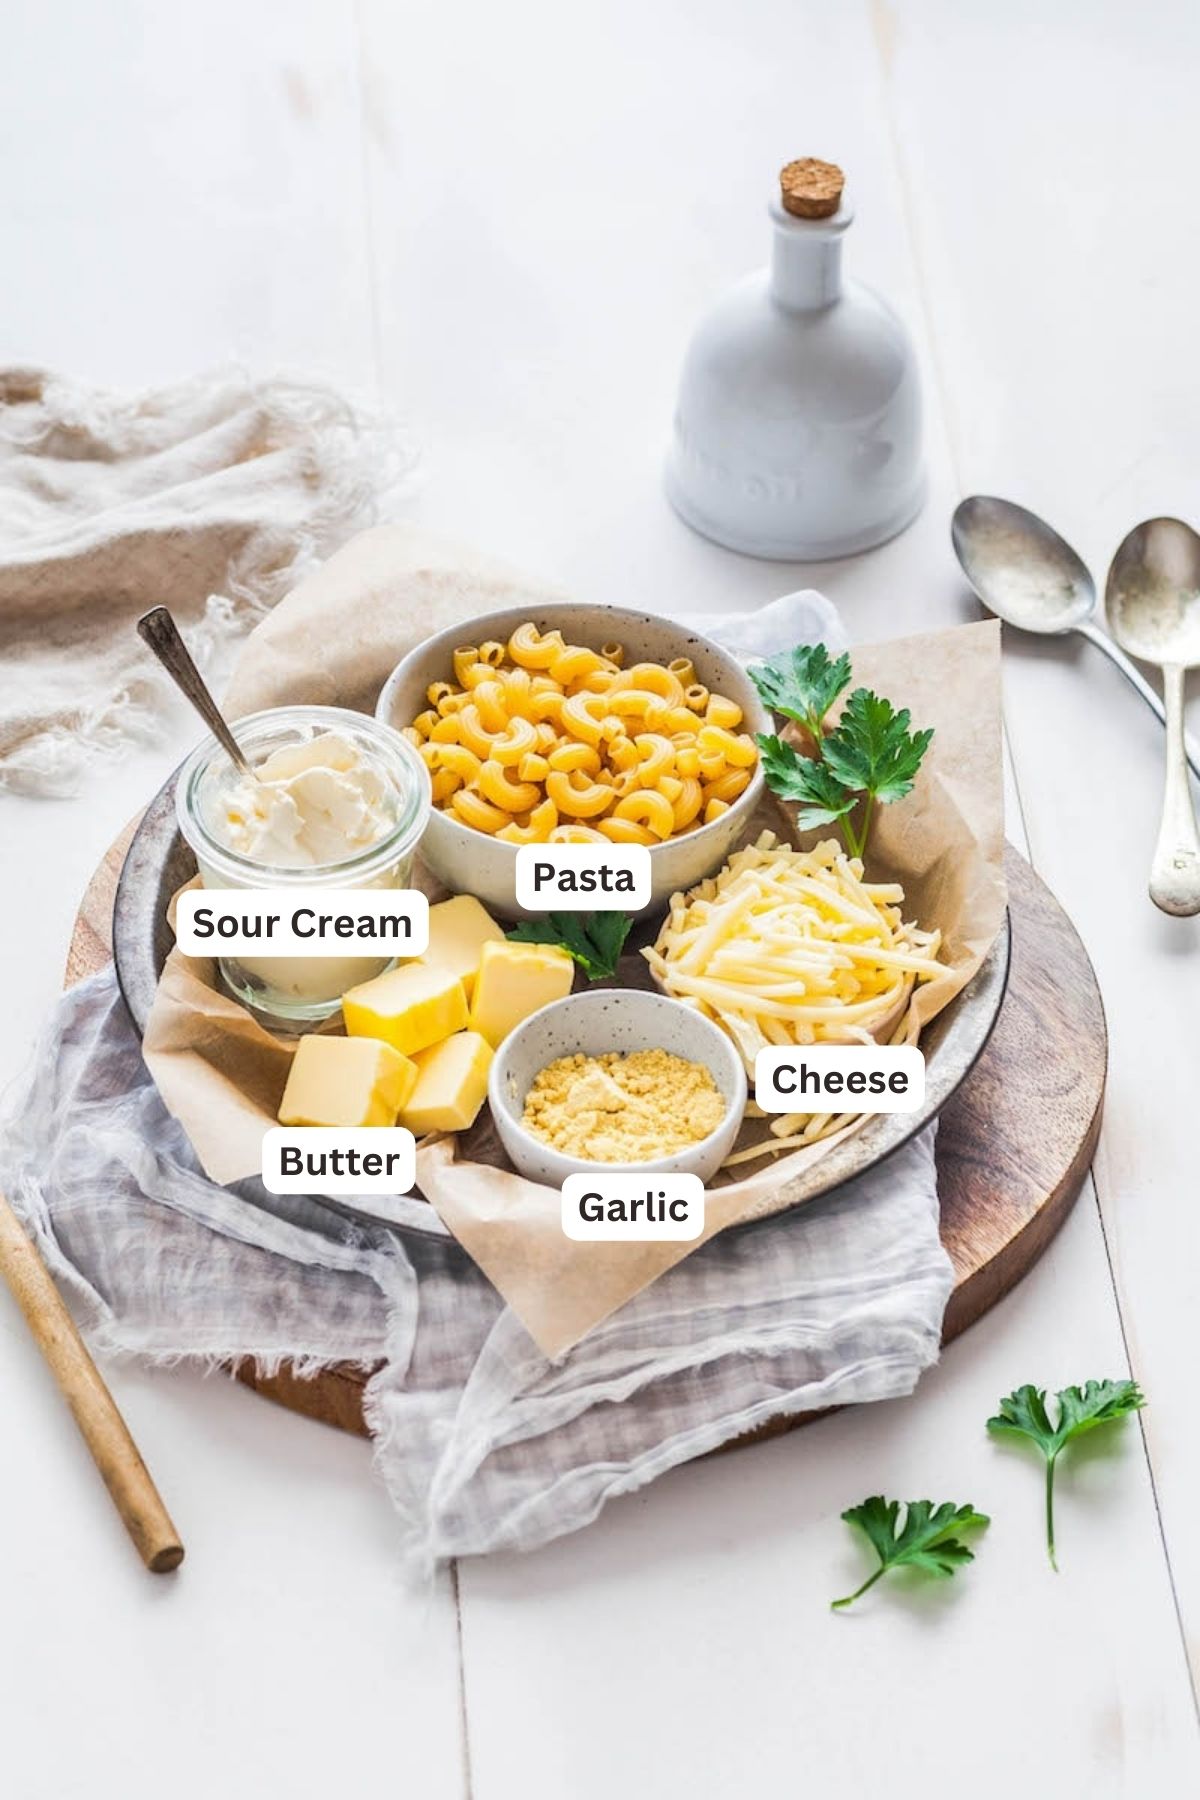 Ingredients for Homemade Mac and Cheese.